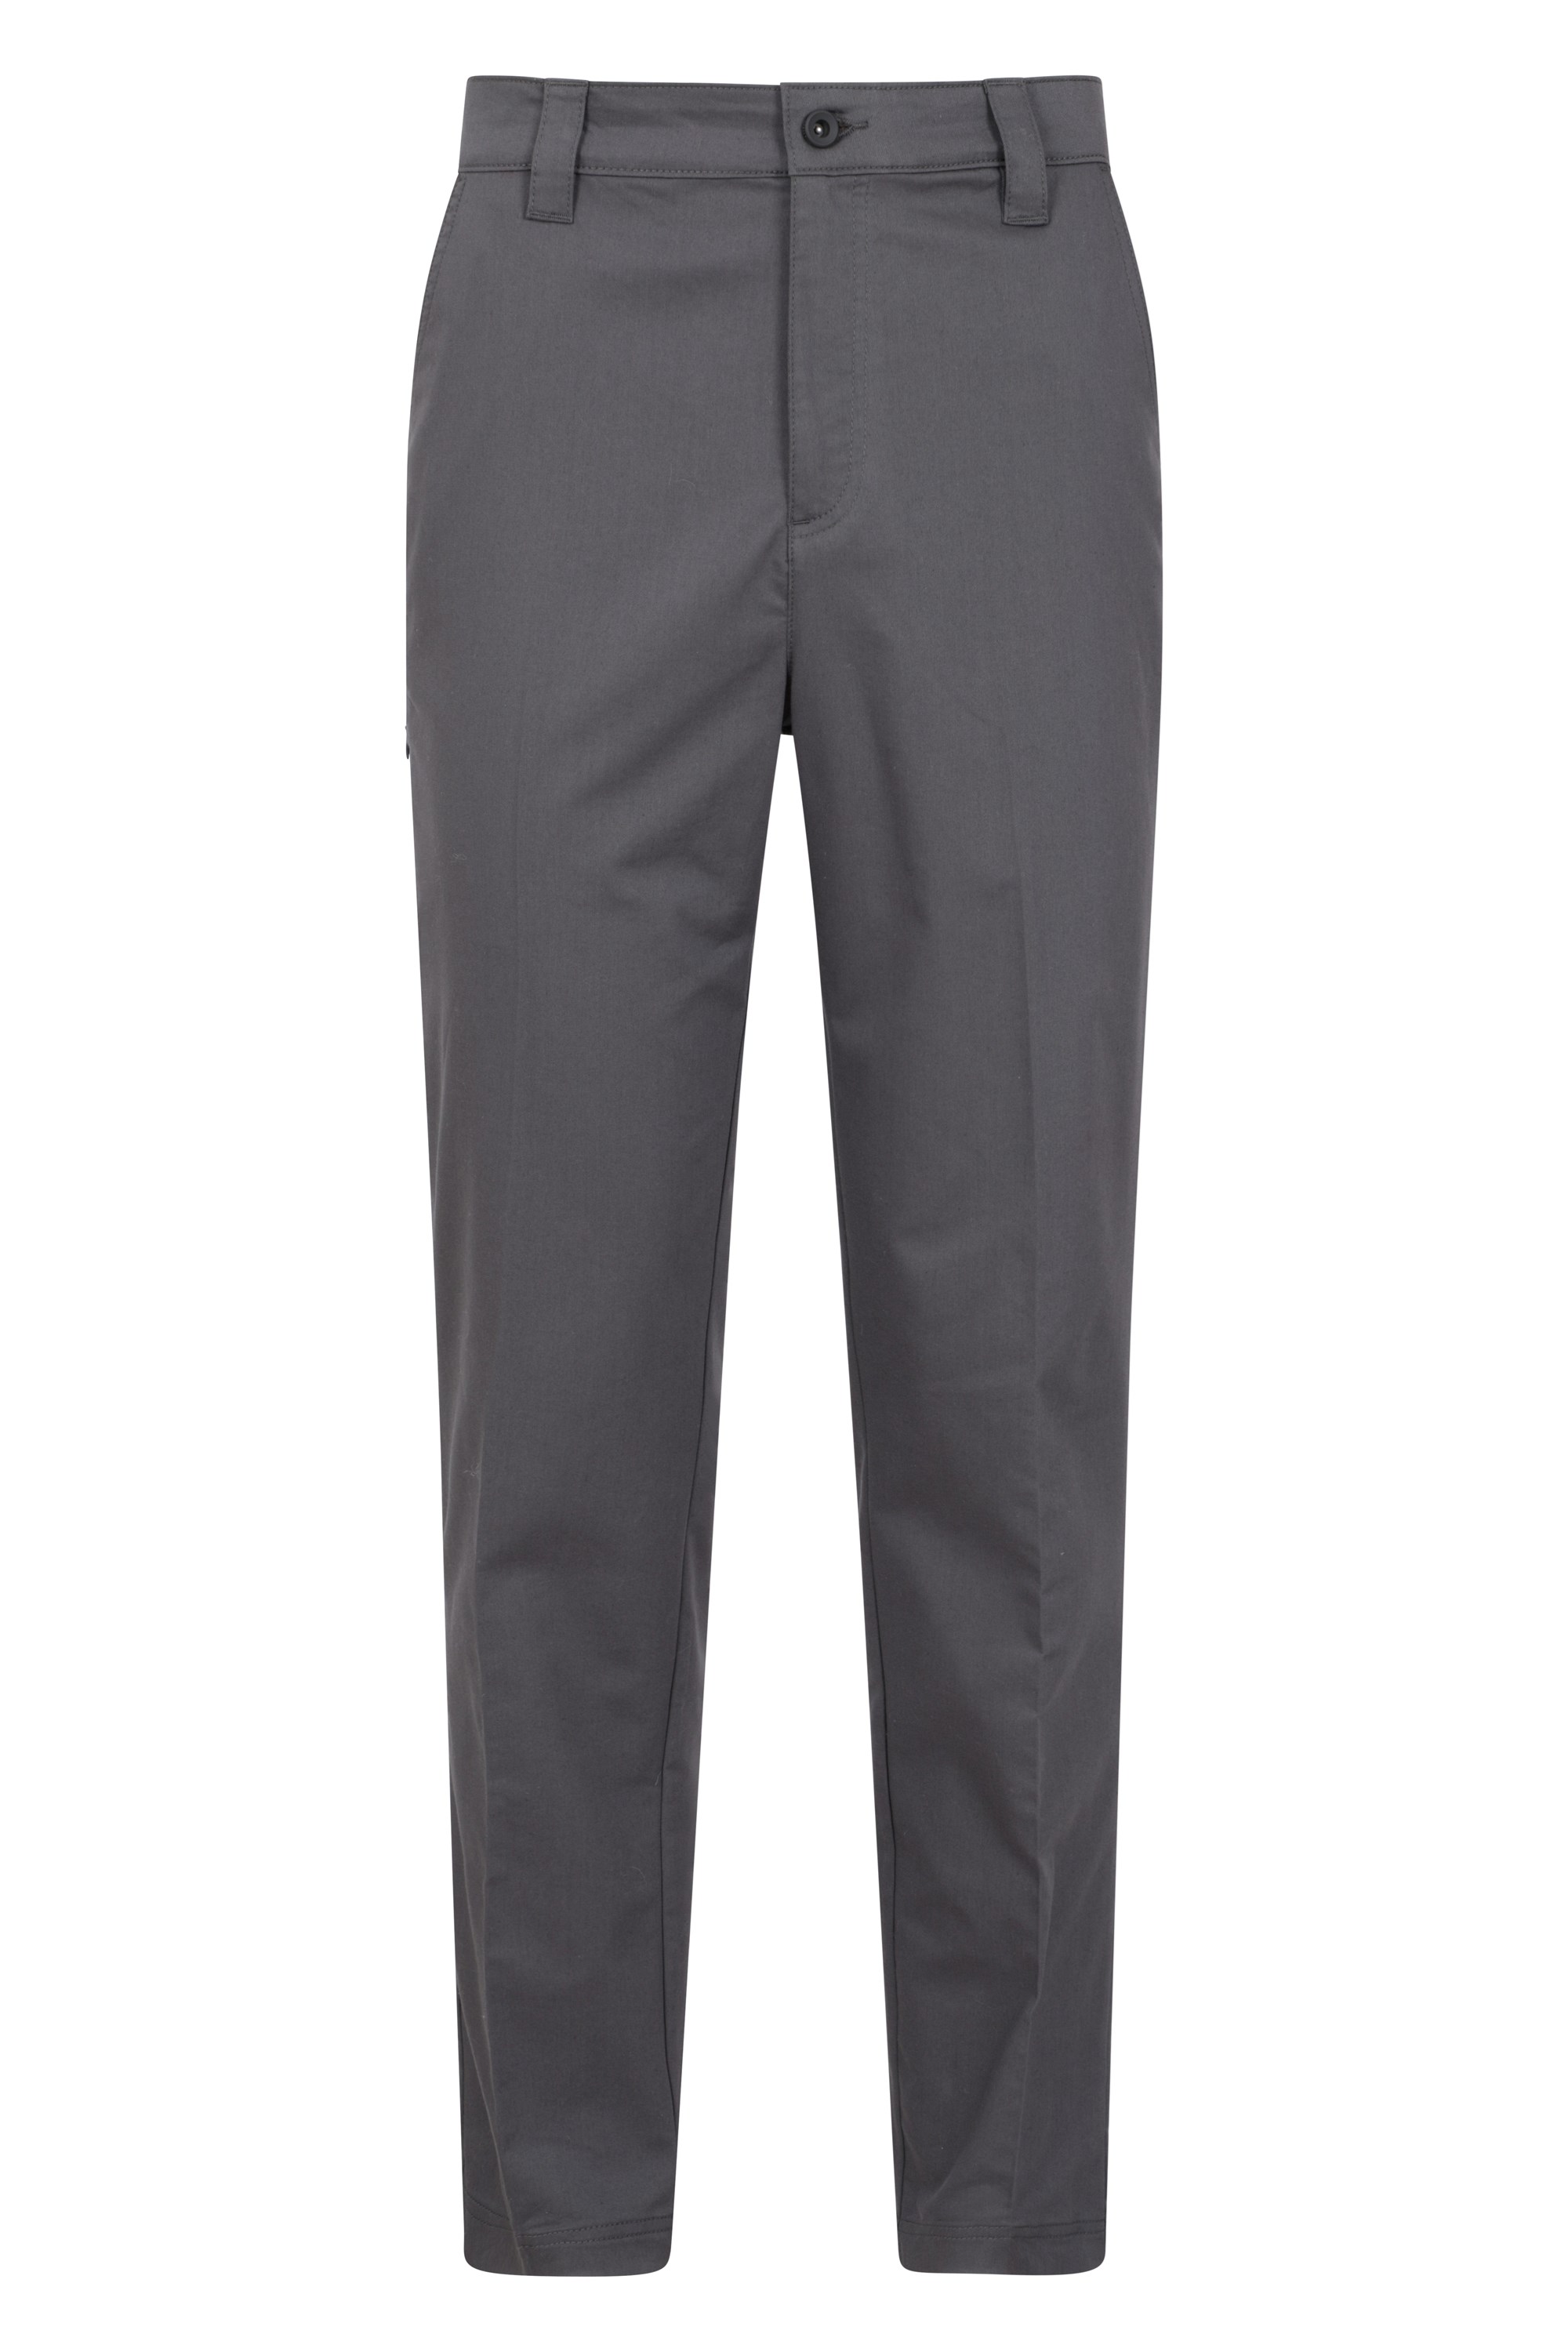 Mens Sweat Wicking Golf Trousers - Grey